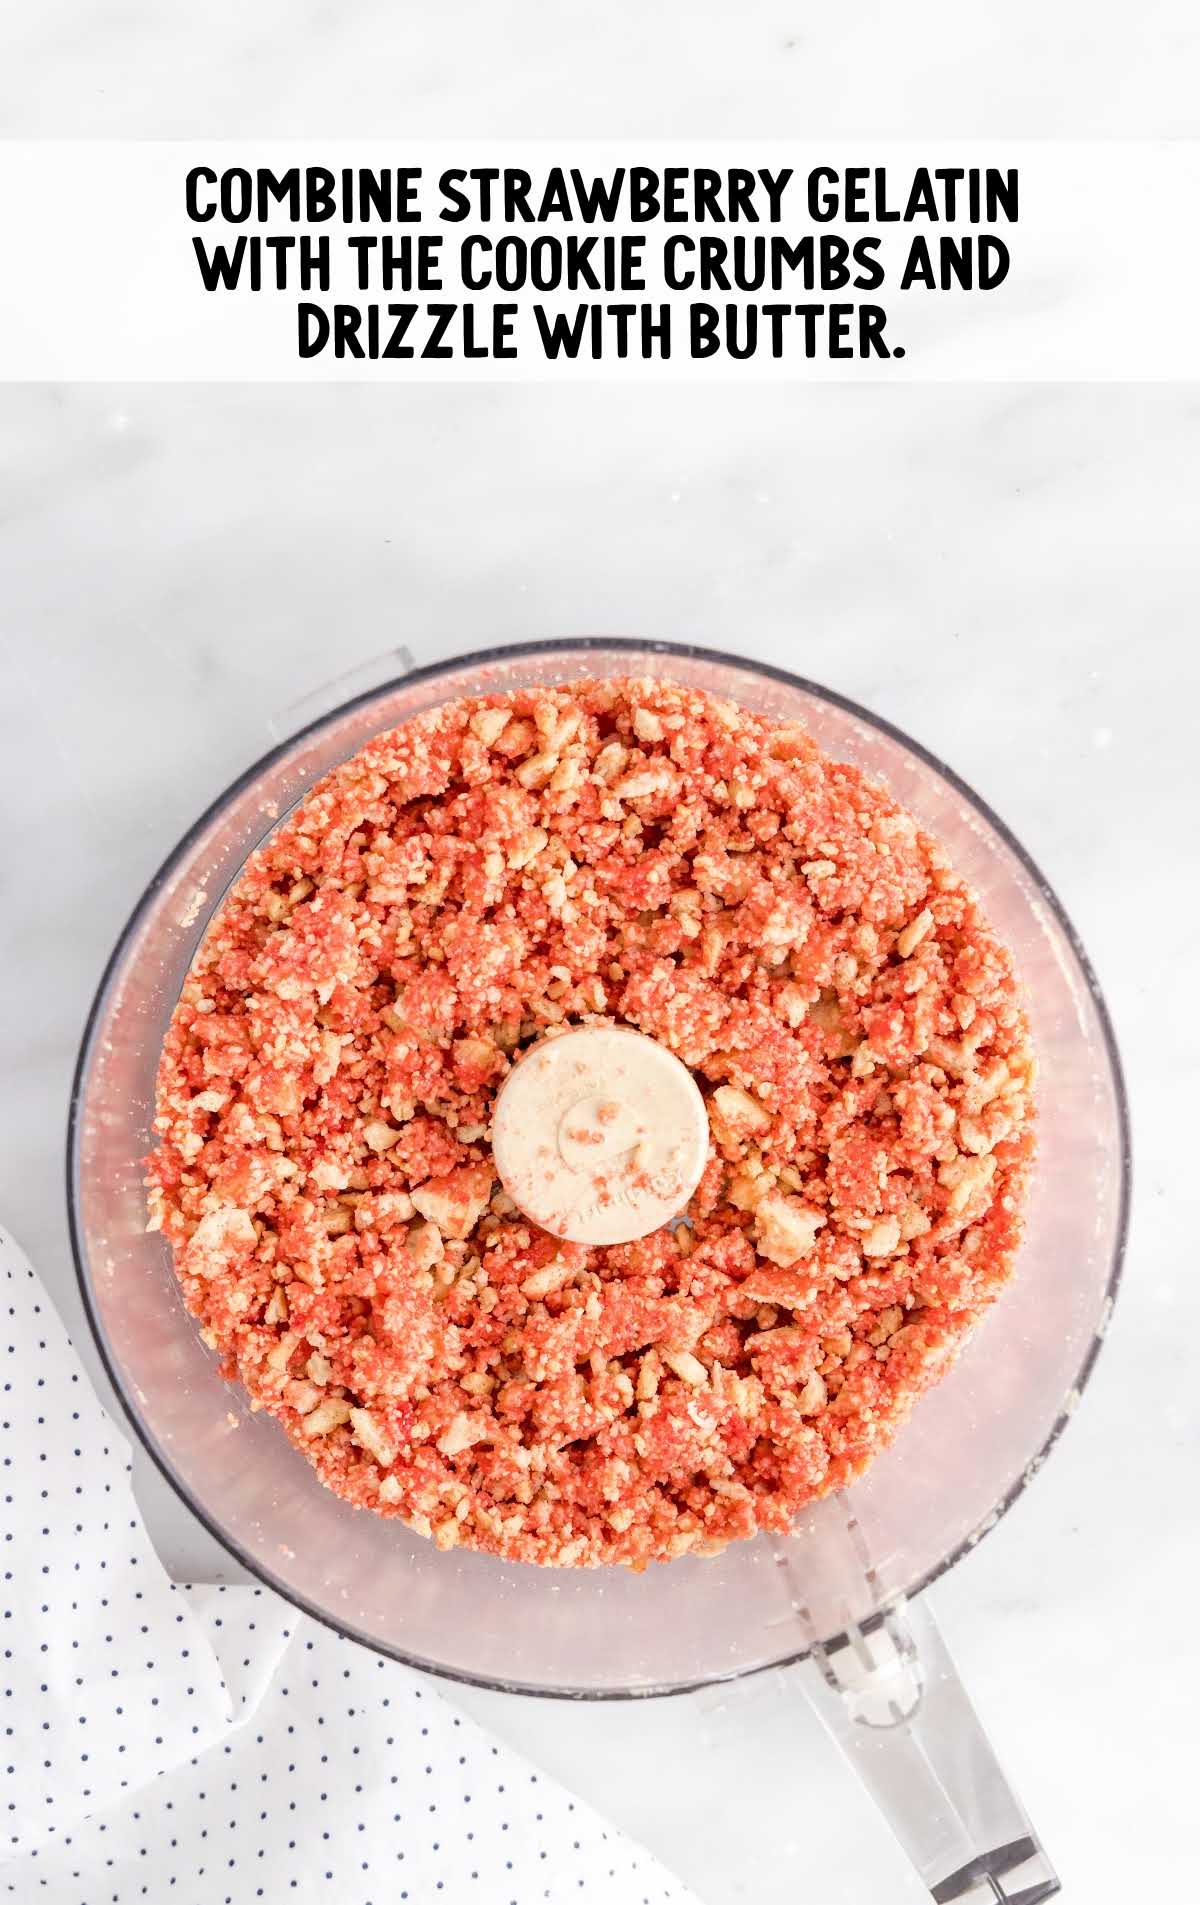 strawberry gelatin combined with cookie crumbs and drizzled with butter in a bowl